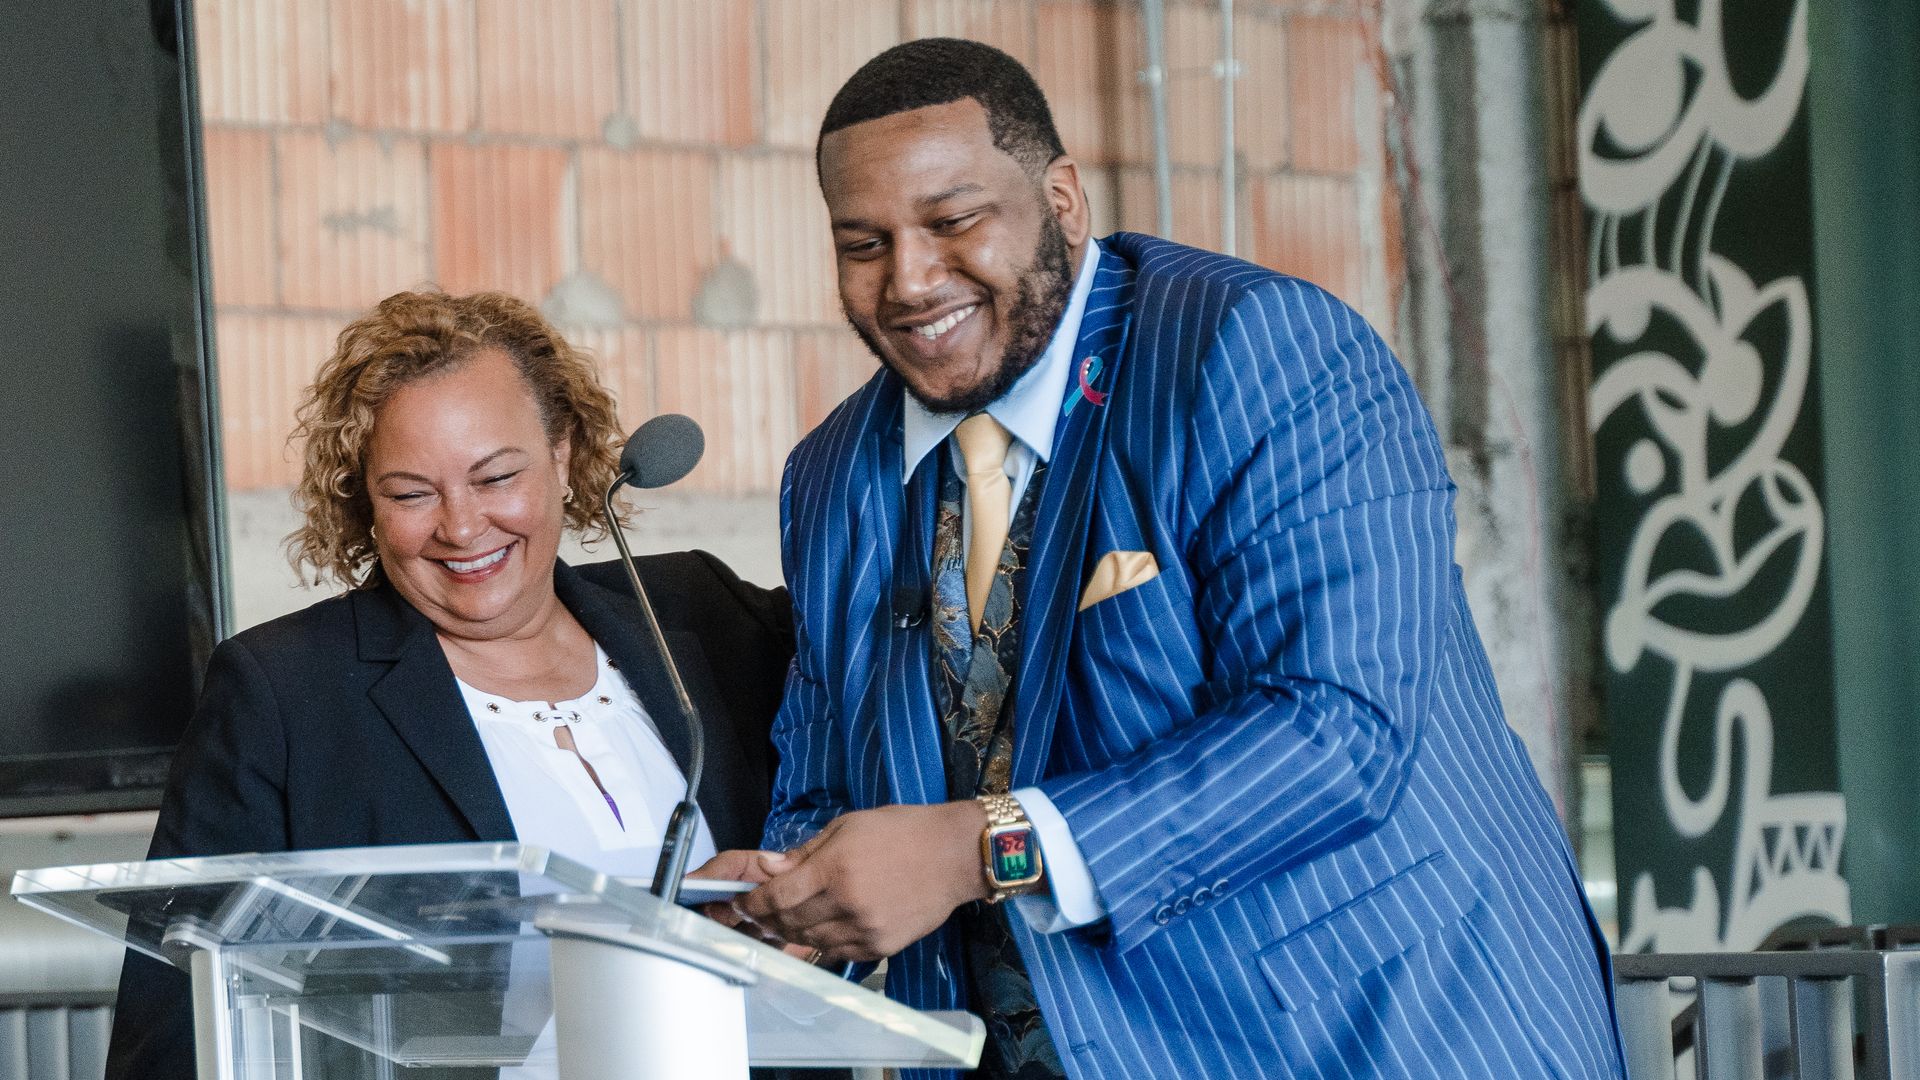 Lisa Jackson, Apple’s VP of environment, policy and social initiatives and Mario Crippen, a graduate.